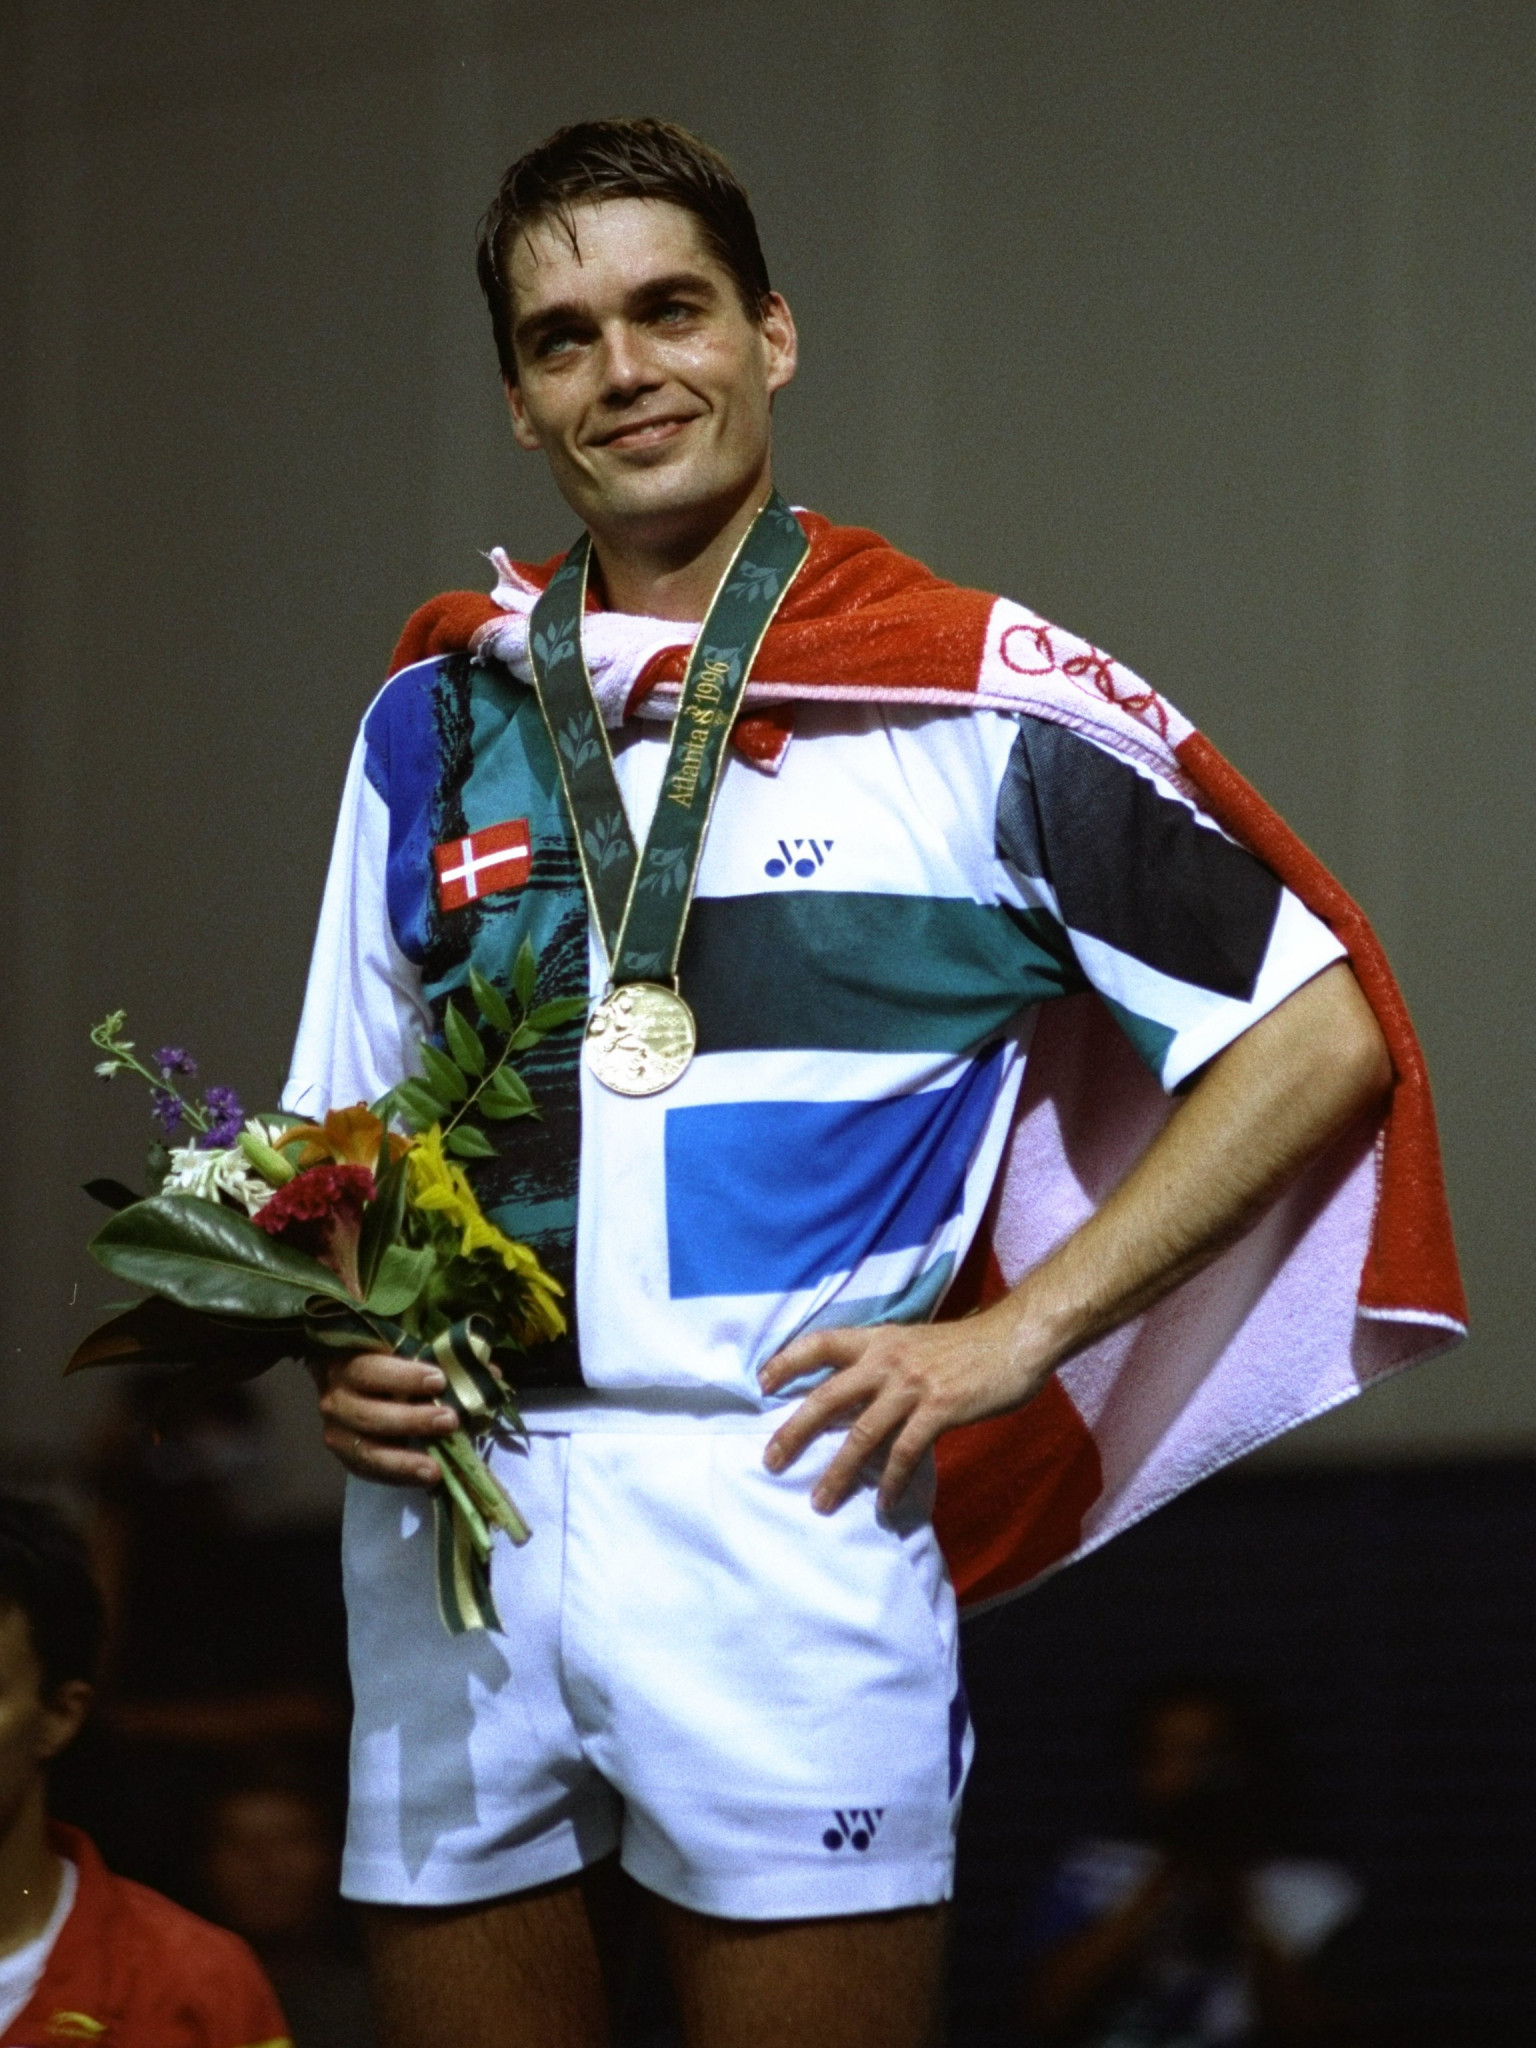 Poul-Erik Høyer won Olympic gold in the men's singles at Atlanta 1996 ©Getty Images